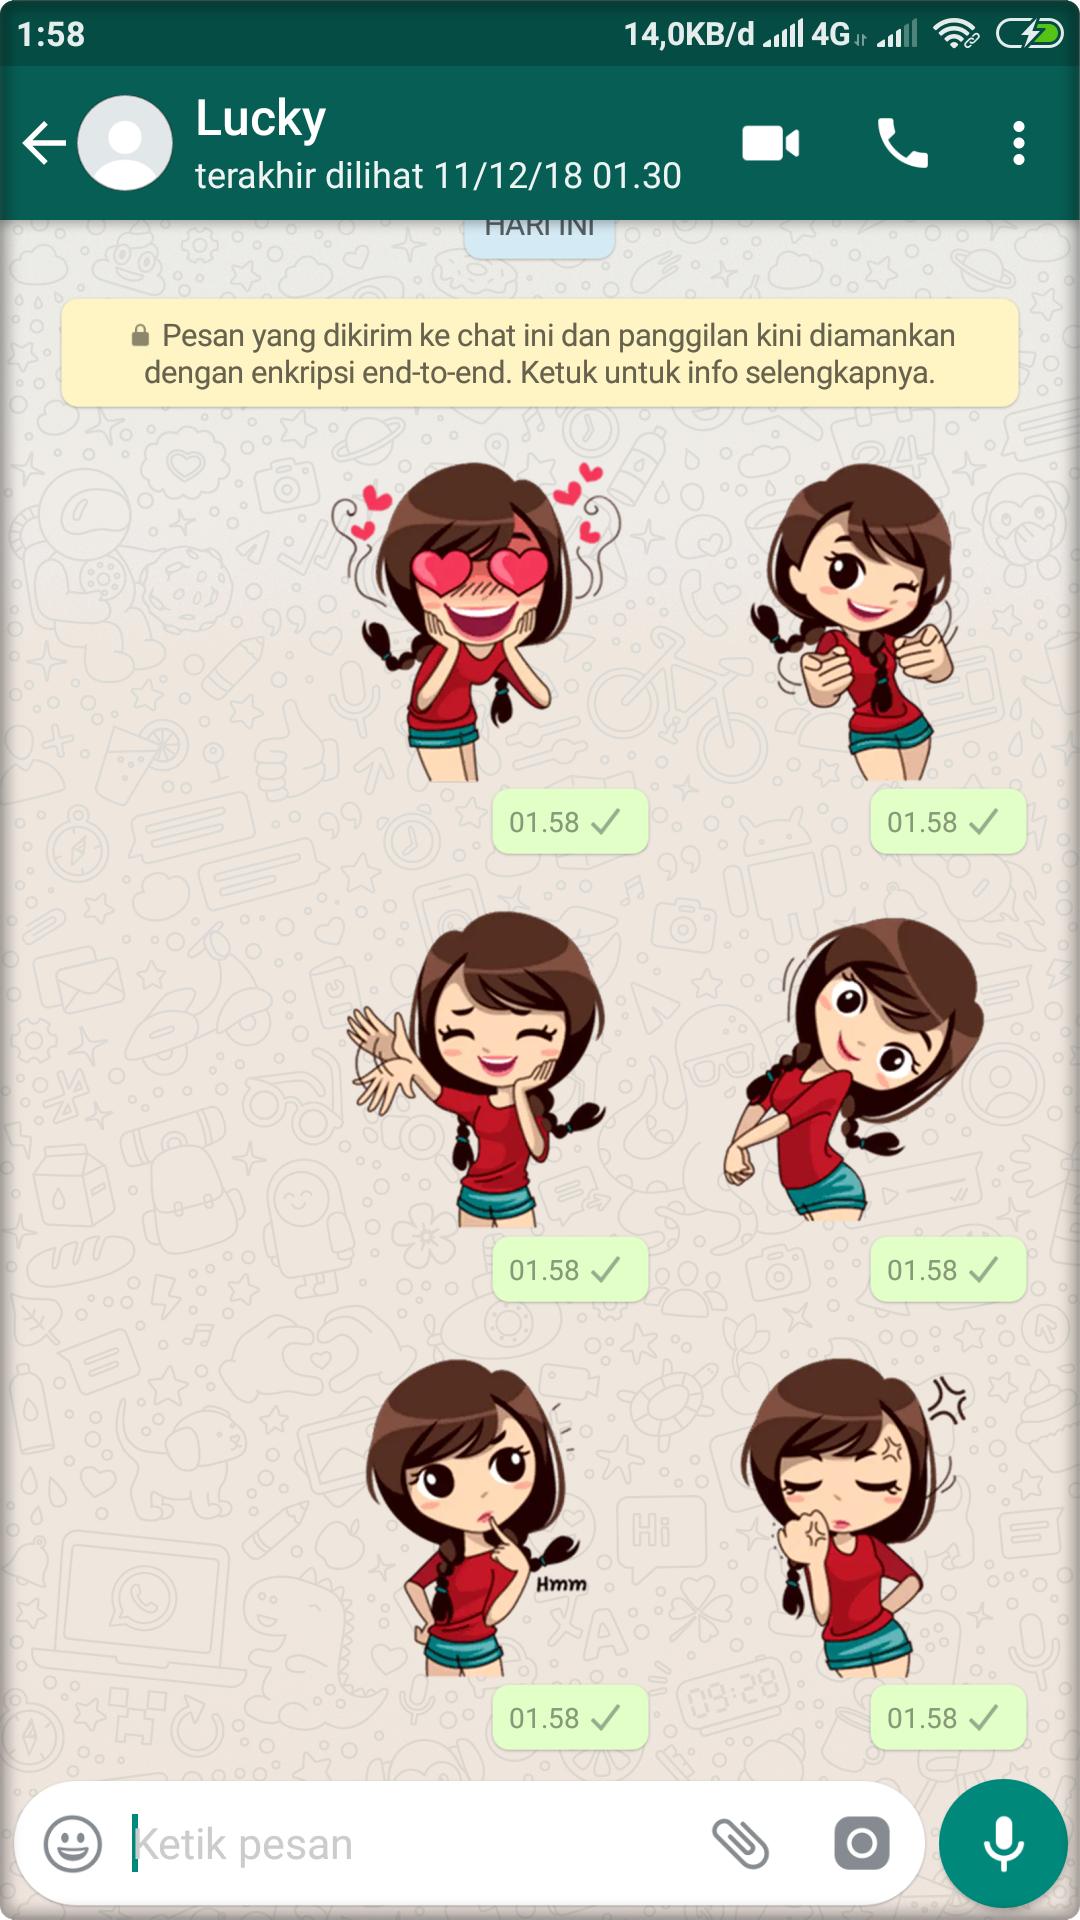 Cute Girls Sticker For Whatsapp For Android Apk Download